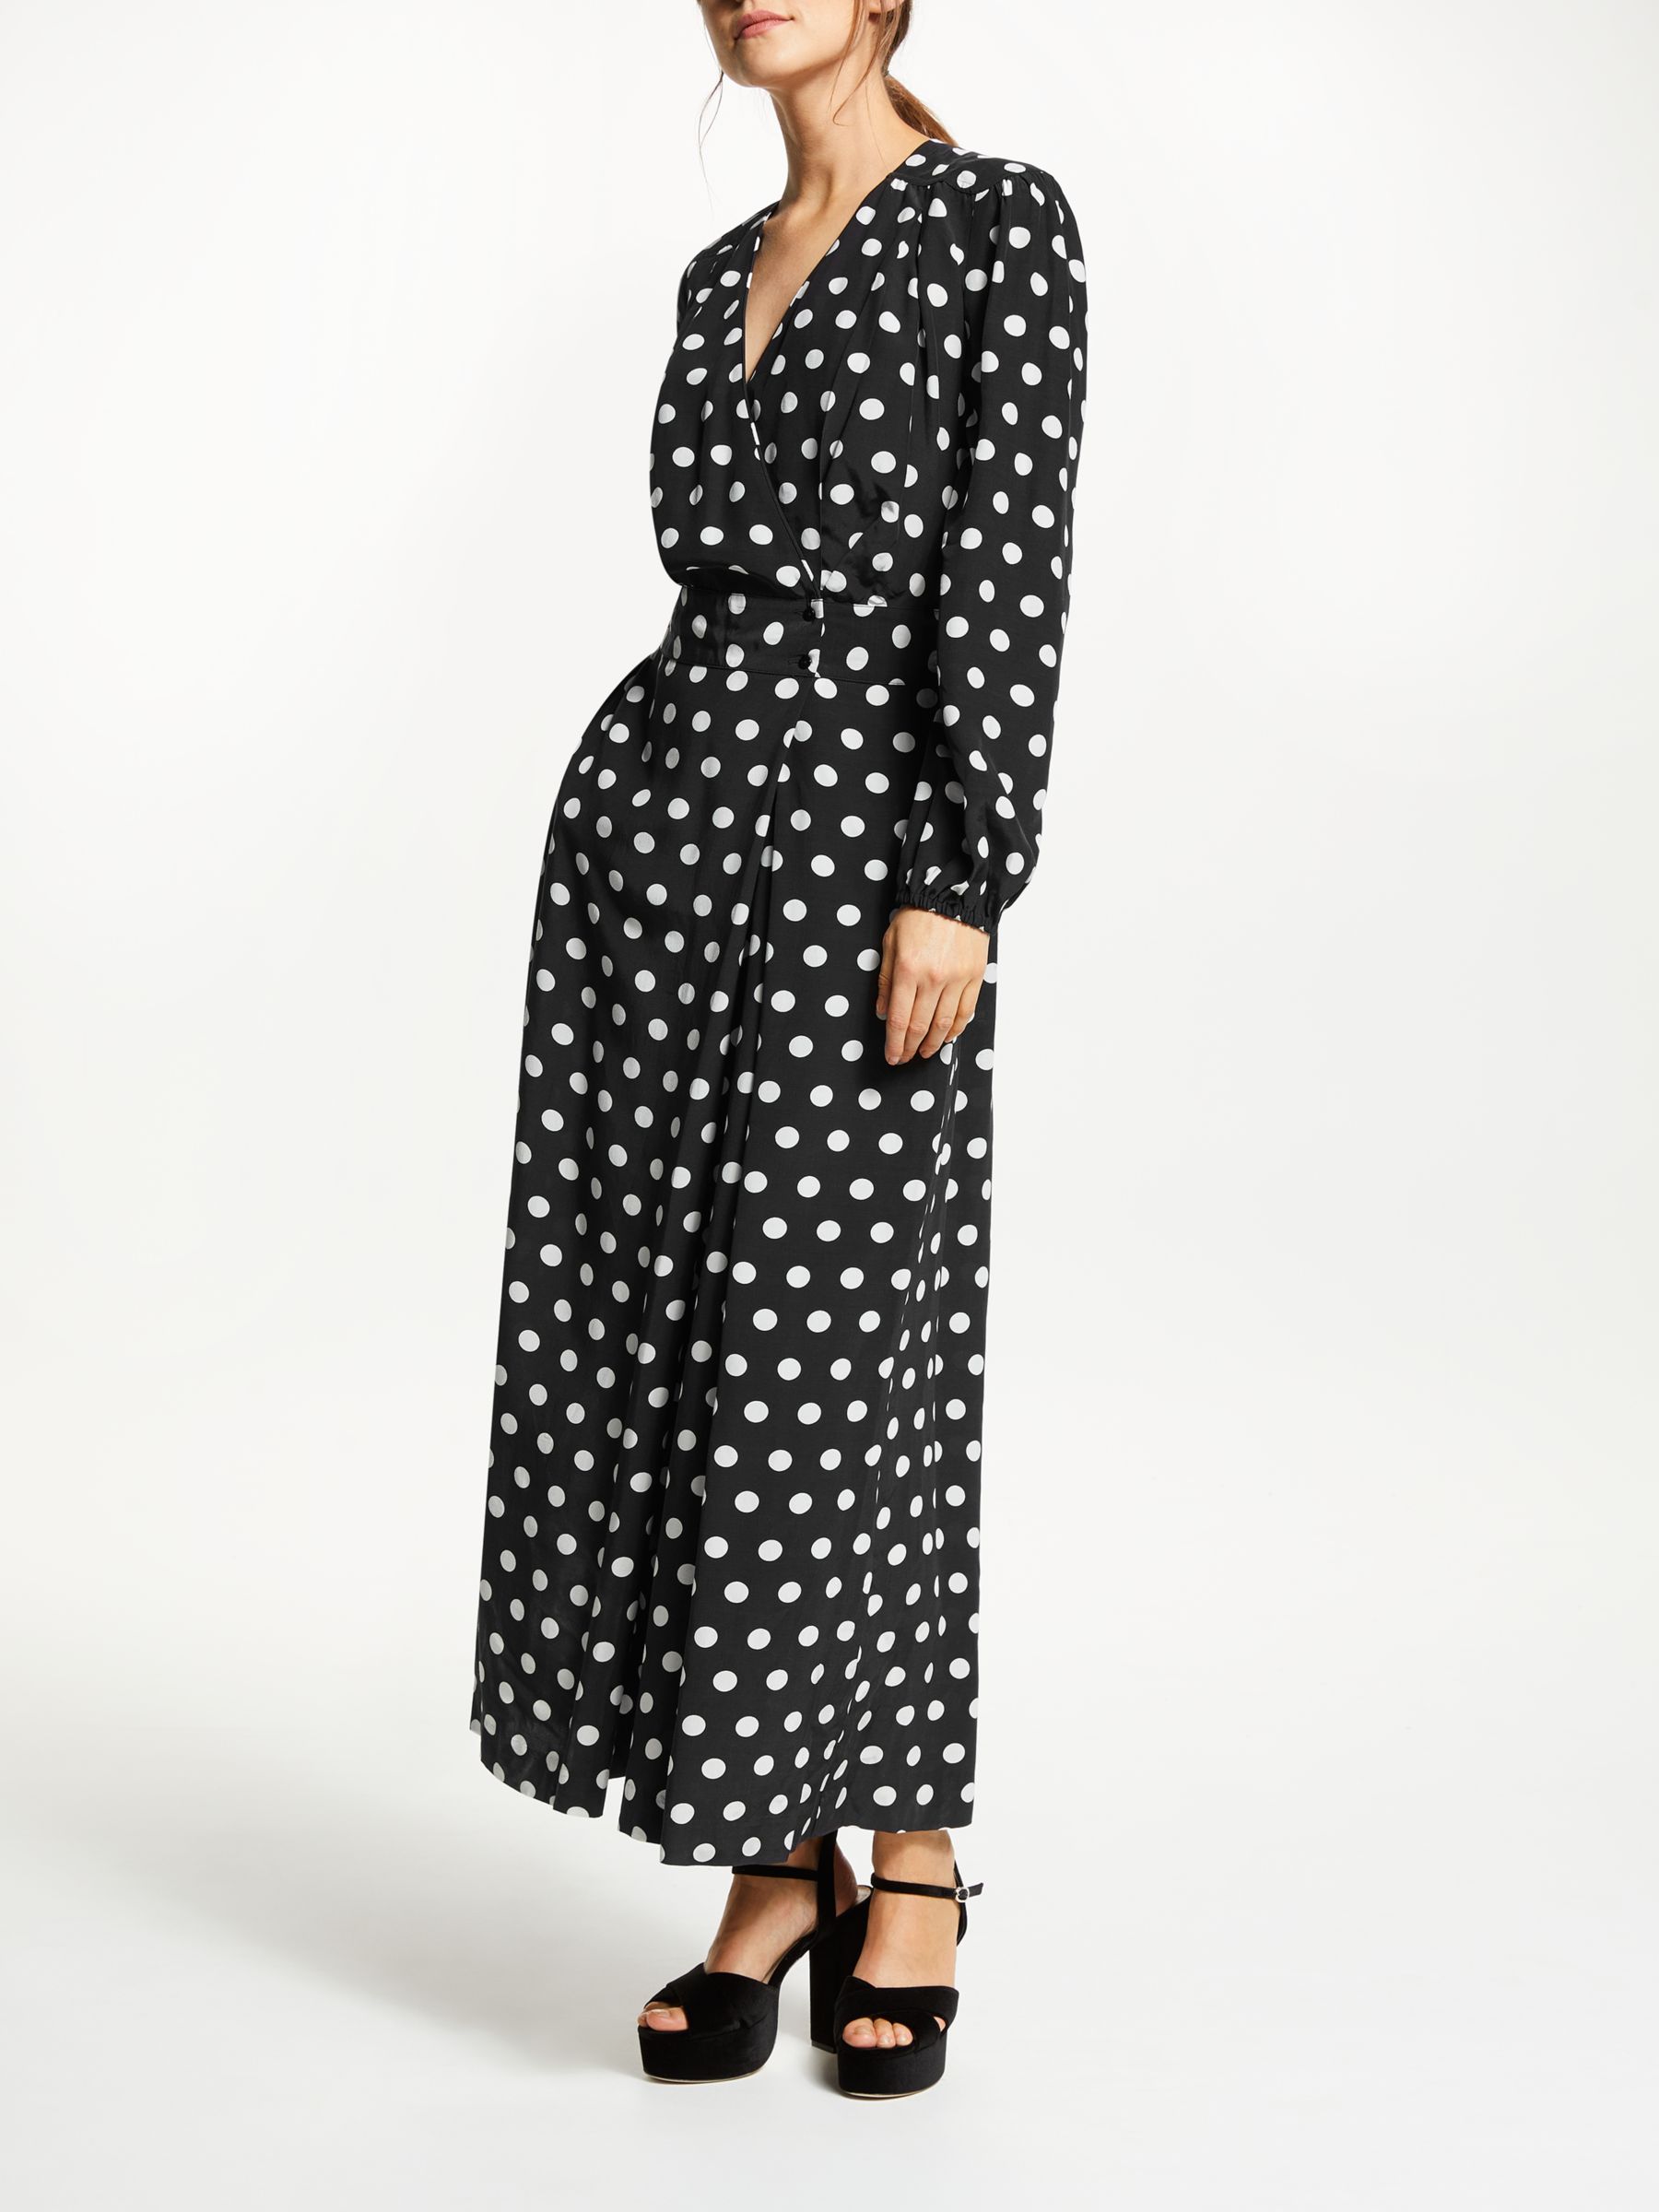 somerset by alice temperley jumpsuit